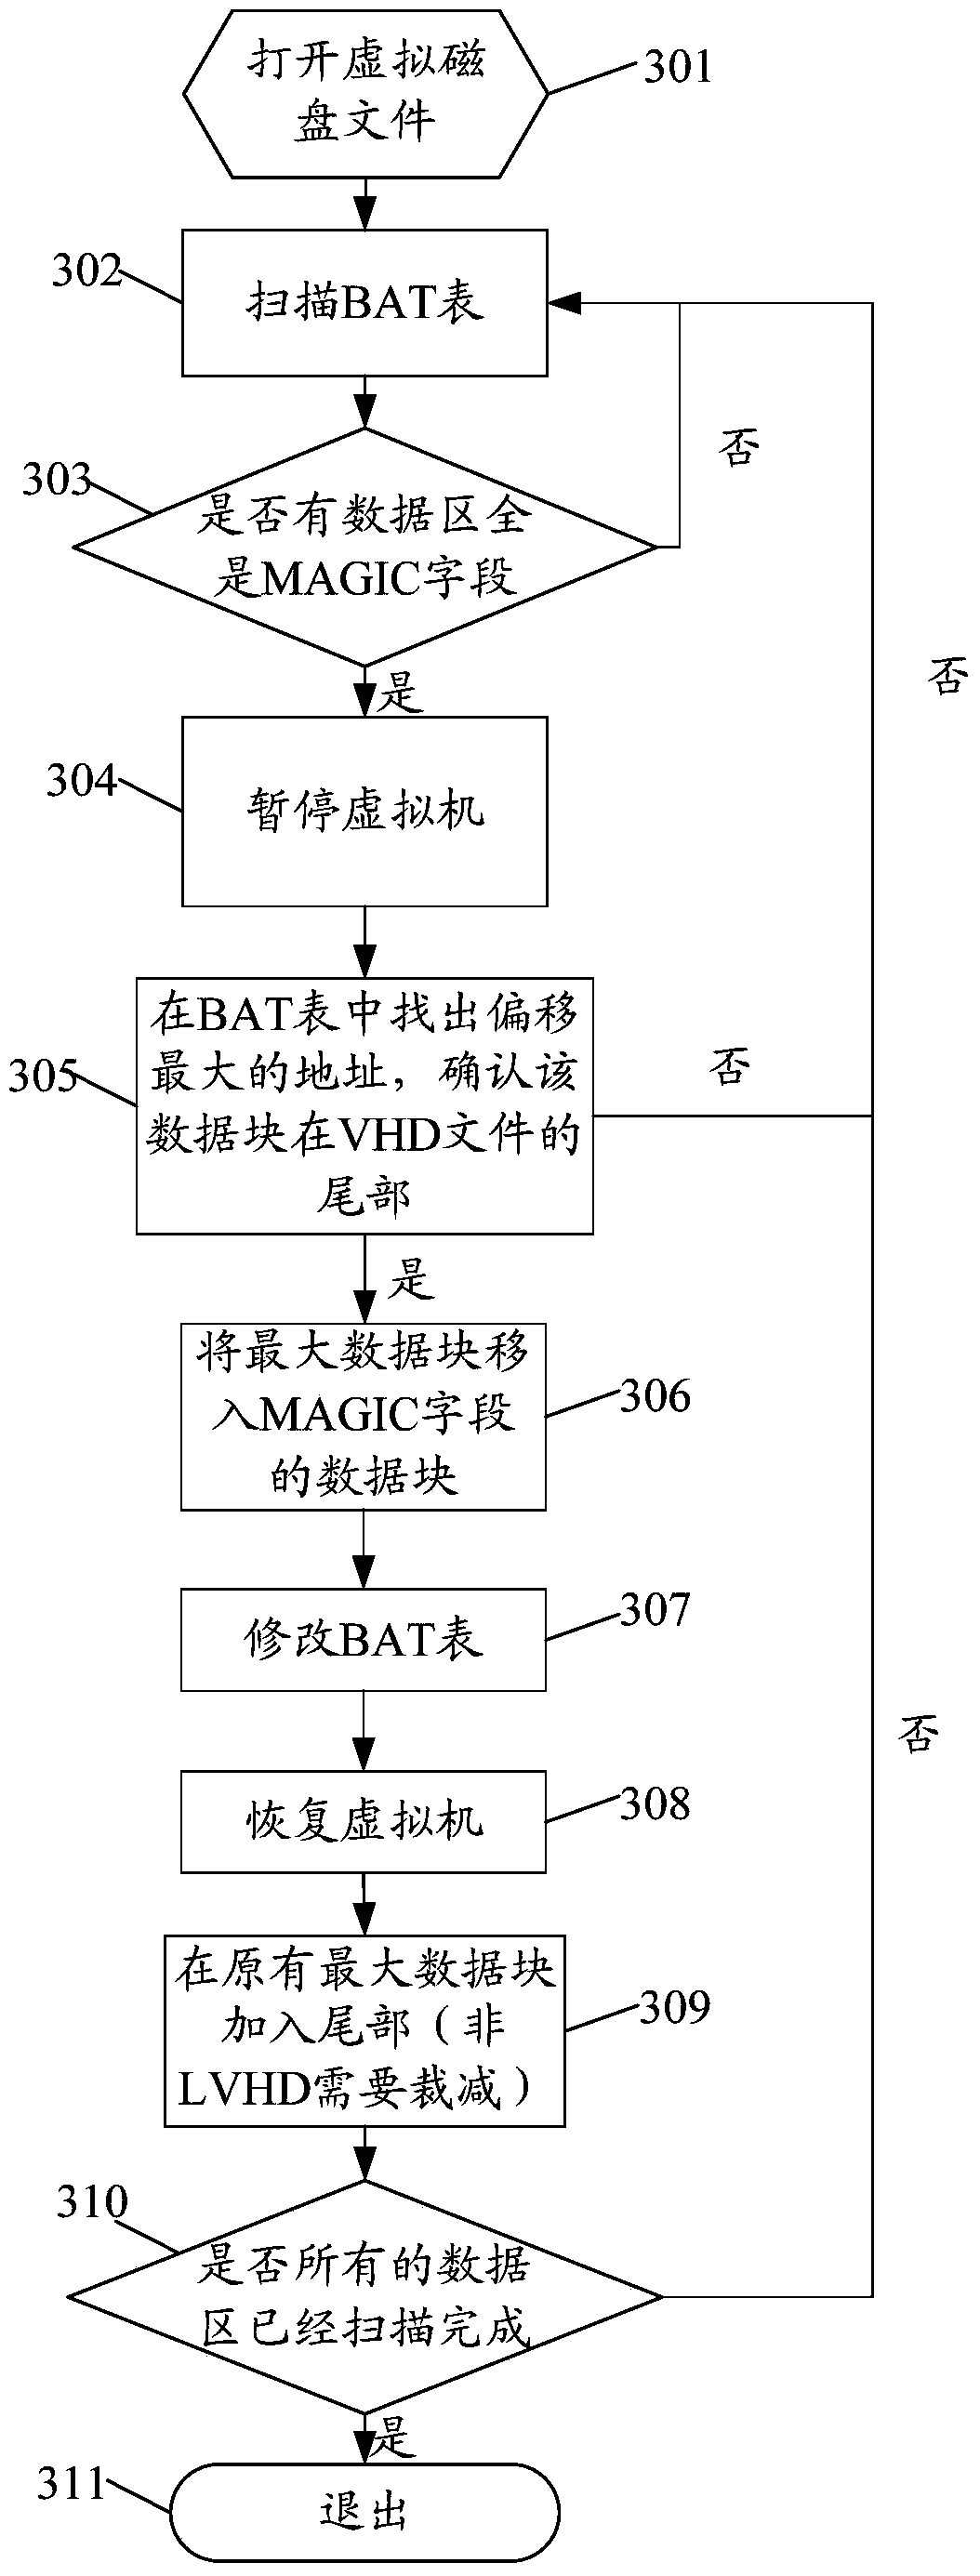 Method and device for dynamically compressing virtual machine disk data by host system